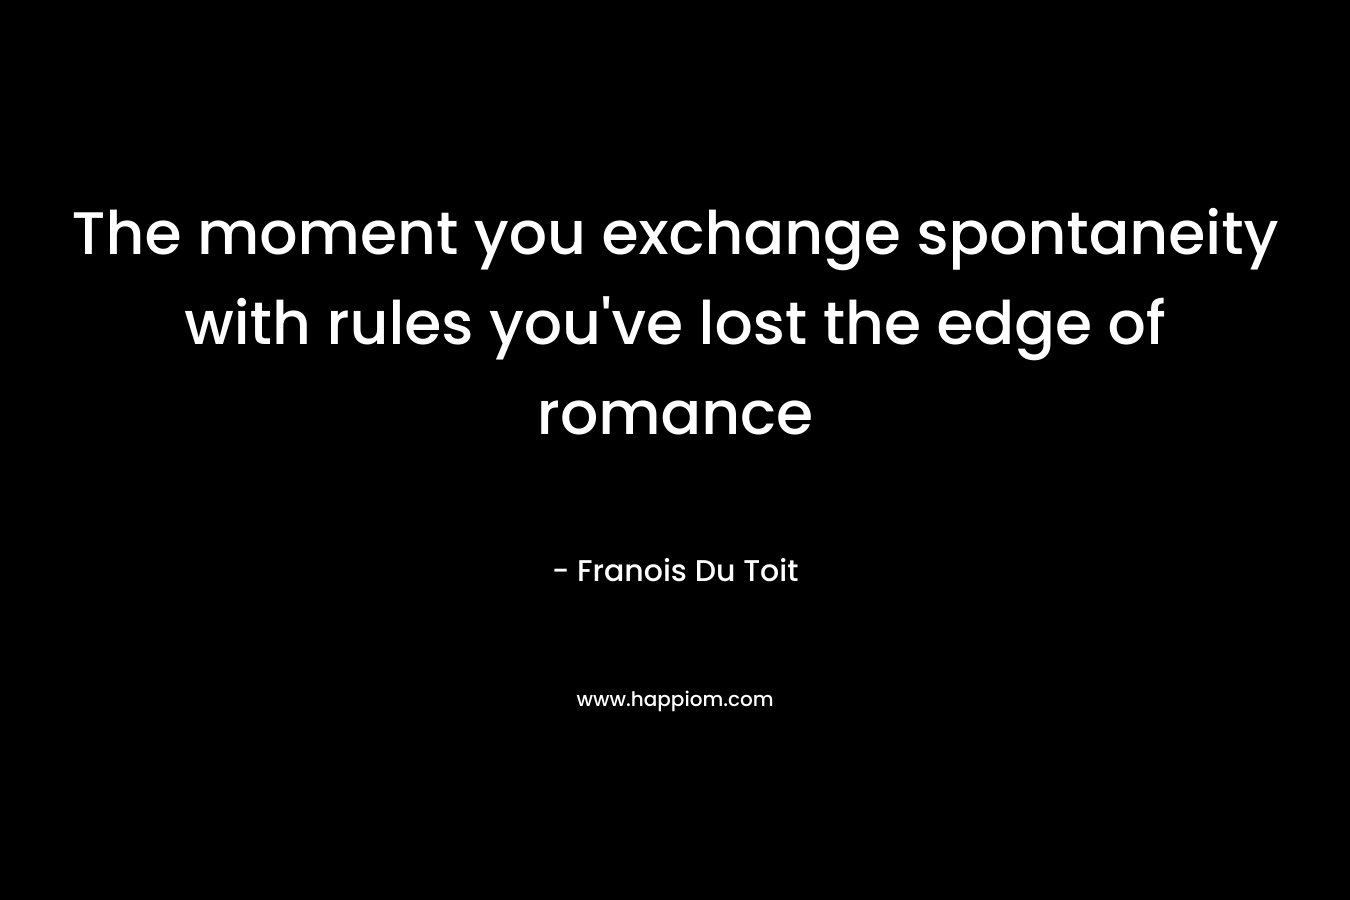 The moment you exchange spontaneity with rules you’ve lost the edge of romance – Franois Du Toit